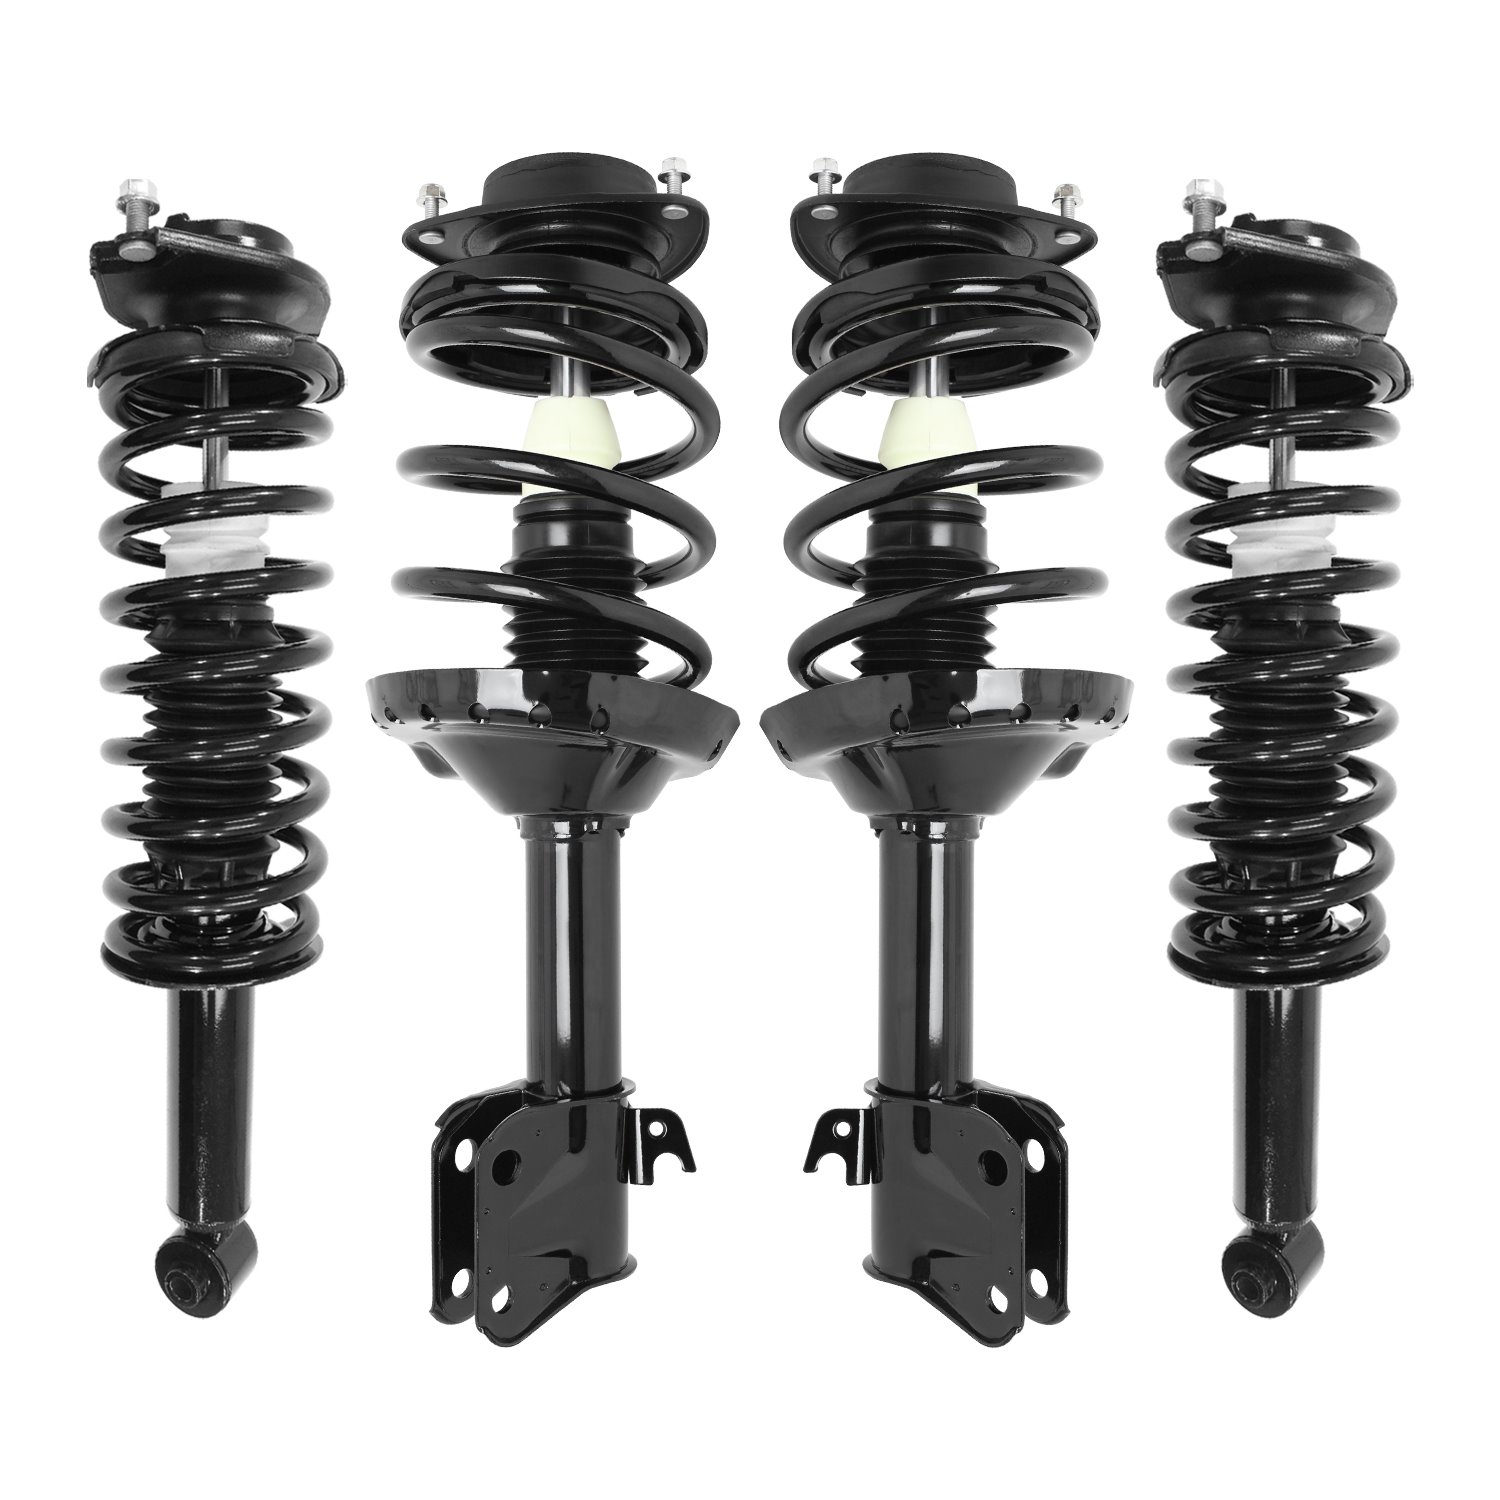 4-11927-15970-001 Front & Rear Suspension Strut & Coil Spring Assembly Kit Fits Select Subaru Forester